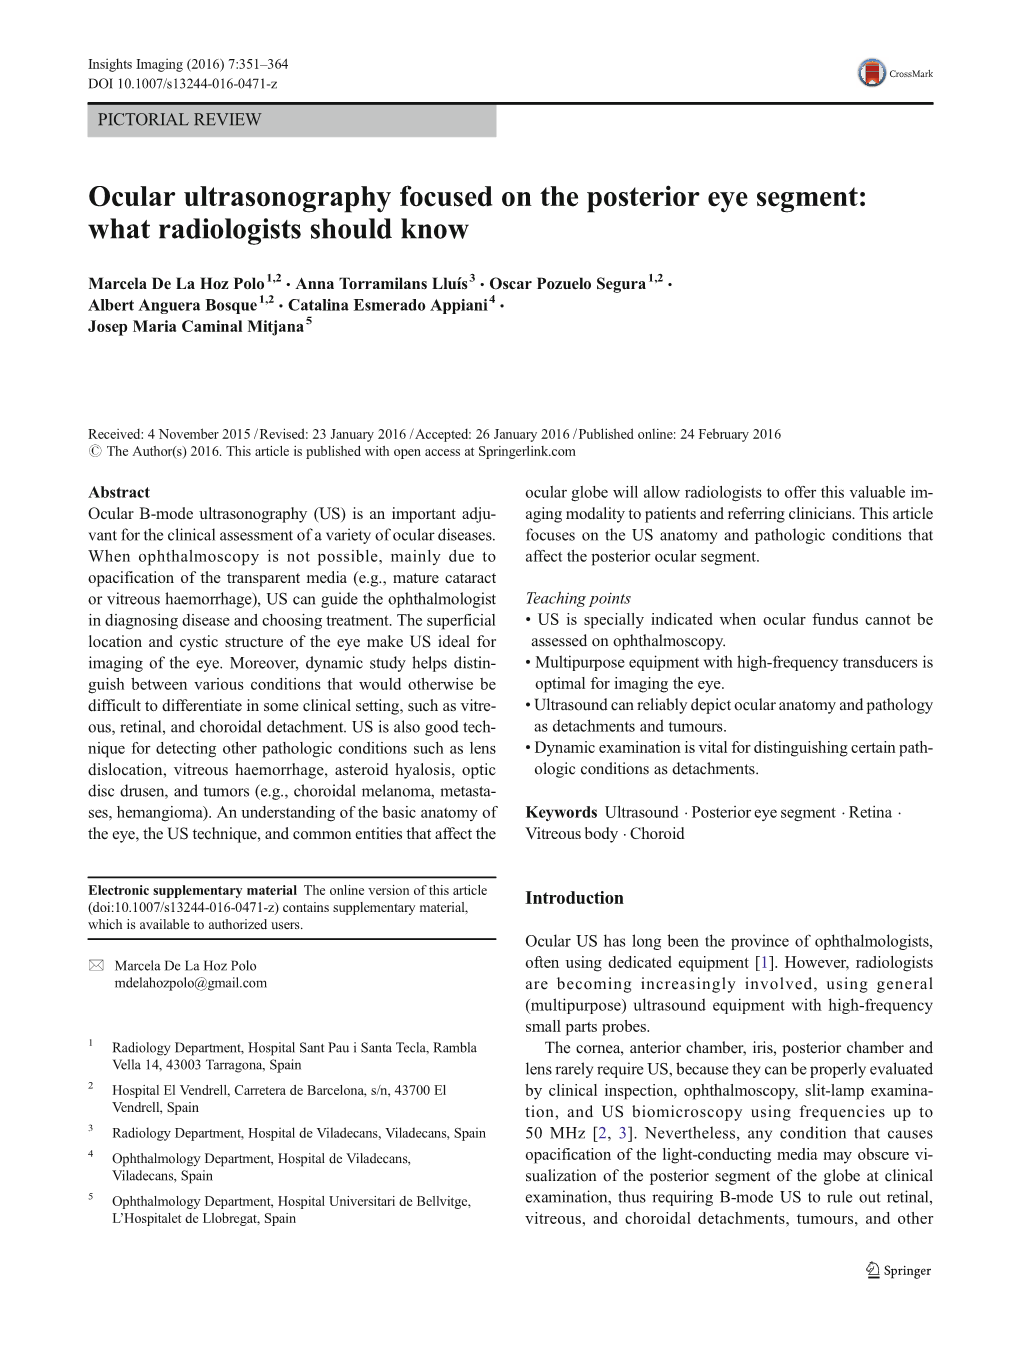 Ocular Ultrasonography Focused on the Posterior Eye Segment: What Radiologists Should Know